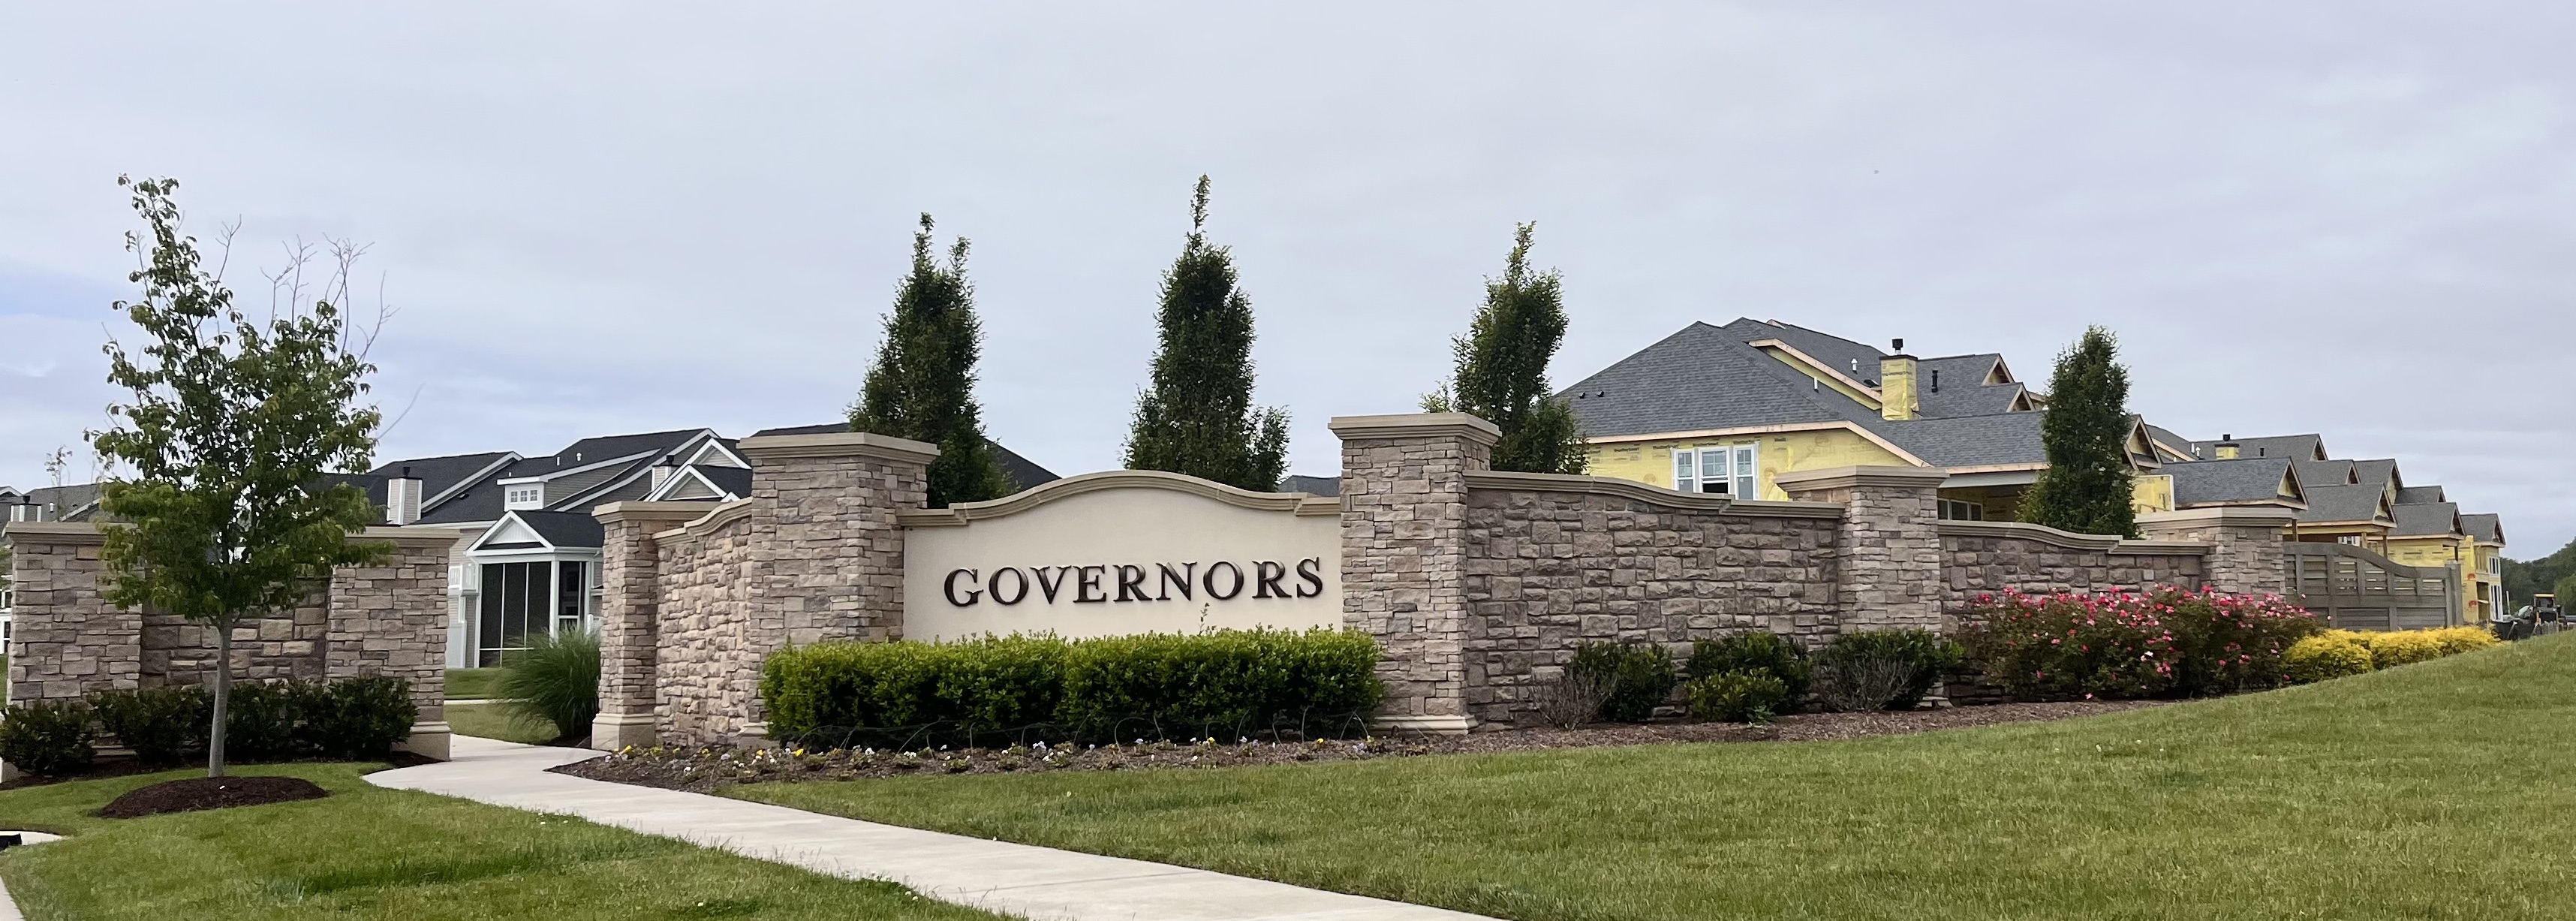 Governors Entrance Sign